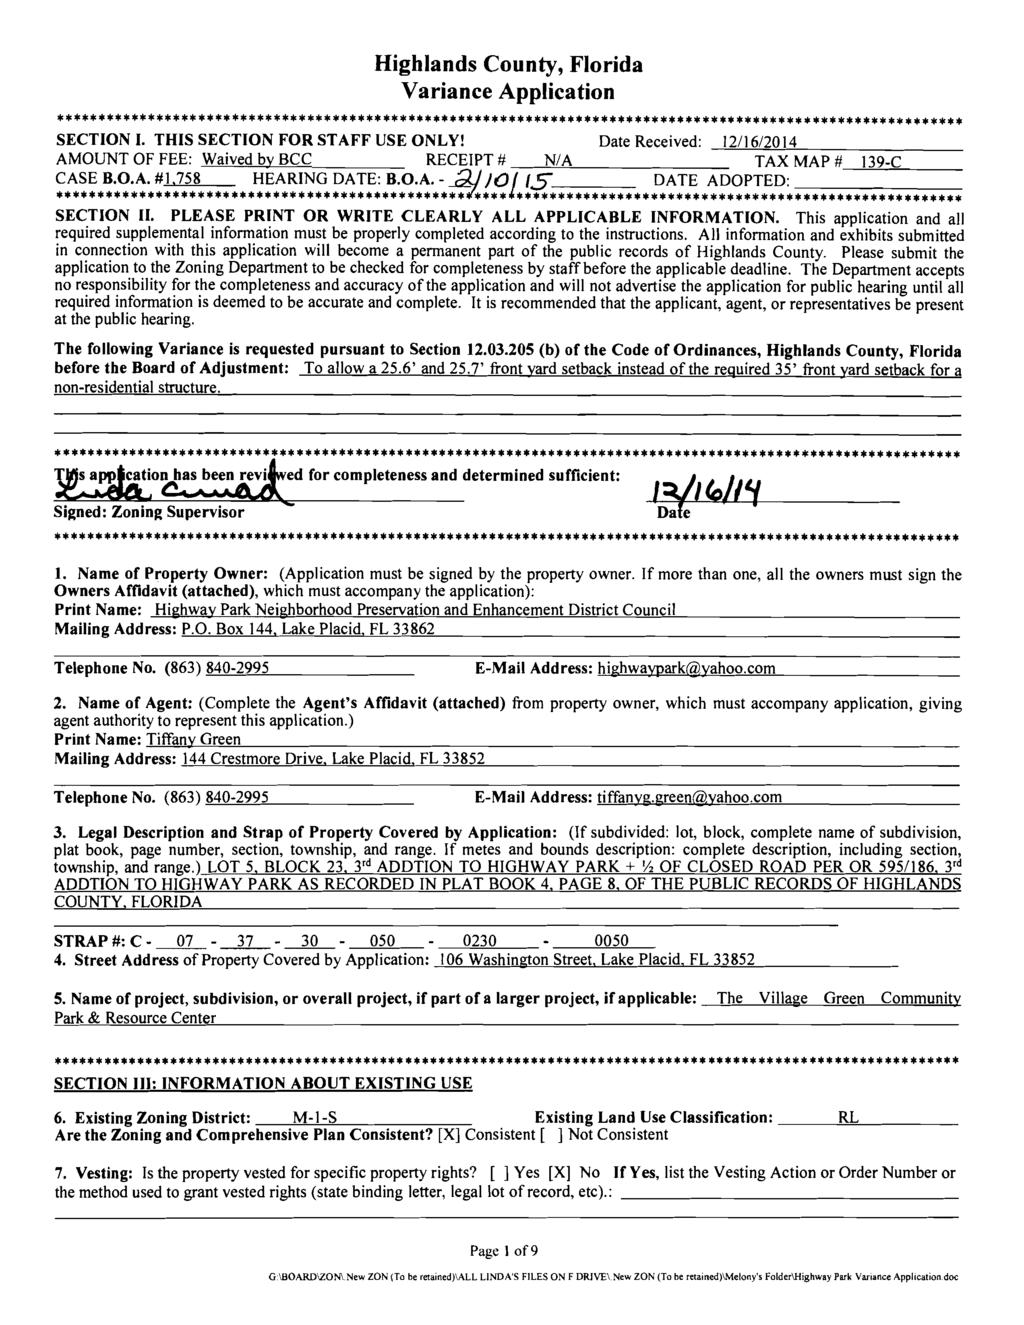 Highlands County, Florida Variance Application SECTION I. THIS SECTION FOR STAFF USE ONLY! Date Received: 12116/2014 AMOUNT OF FEE: Waived bv BCC RECEIPT# N/A TAX MAP # 139-C CASE B.O.A. #I,758 HEARING DATE: B.